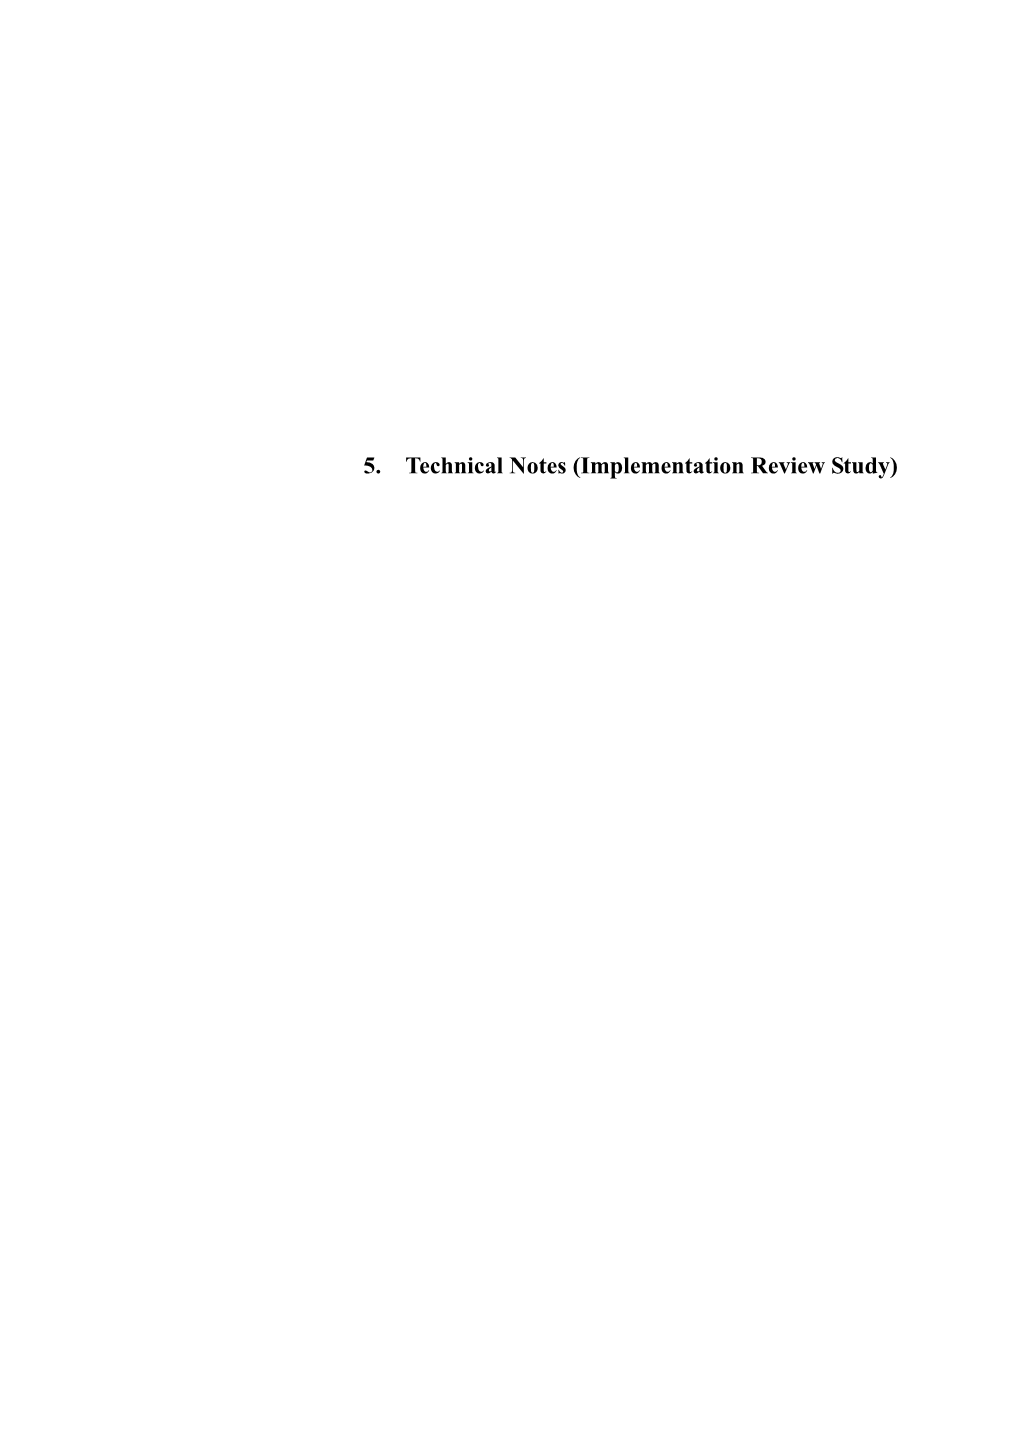 5. Technical Notes (Implementation Review Study)